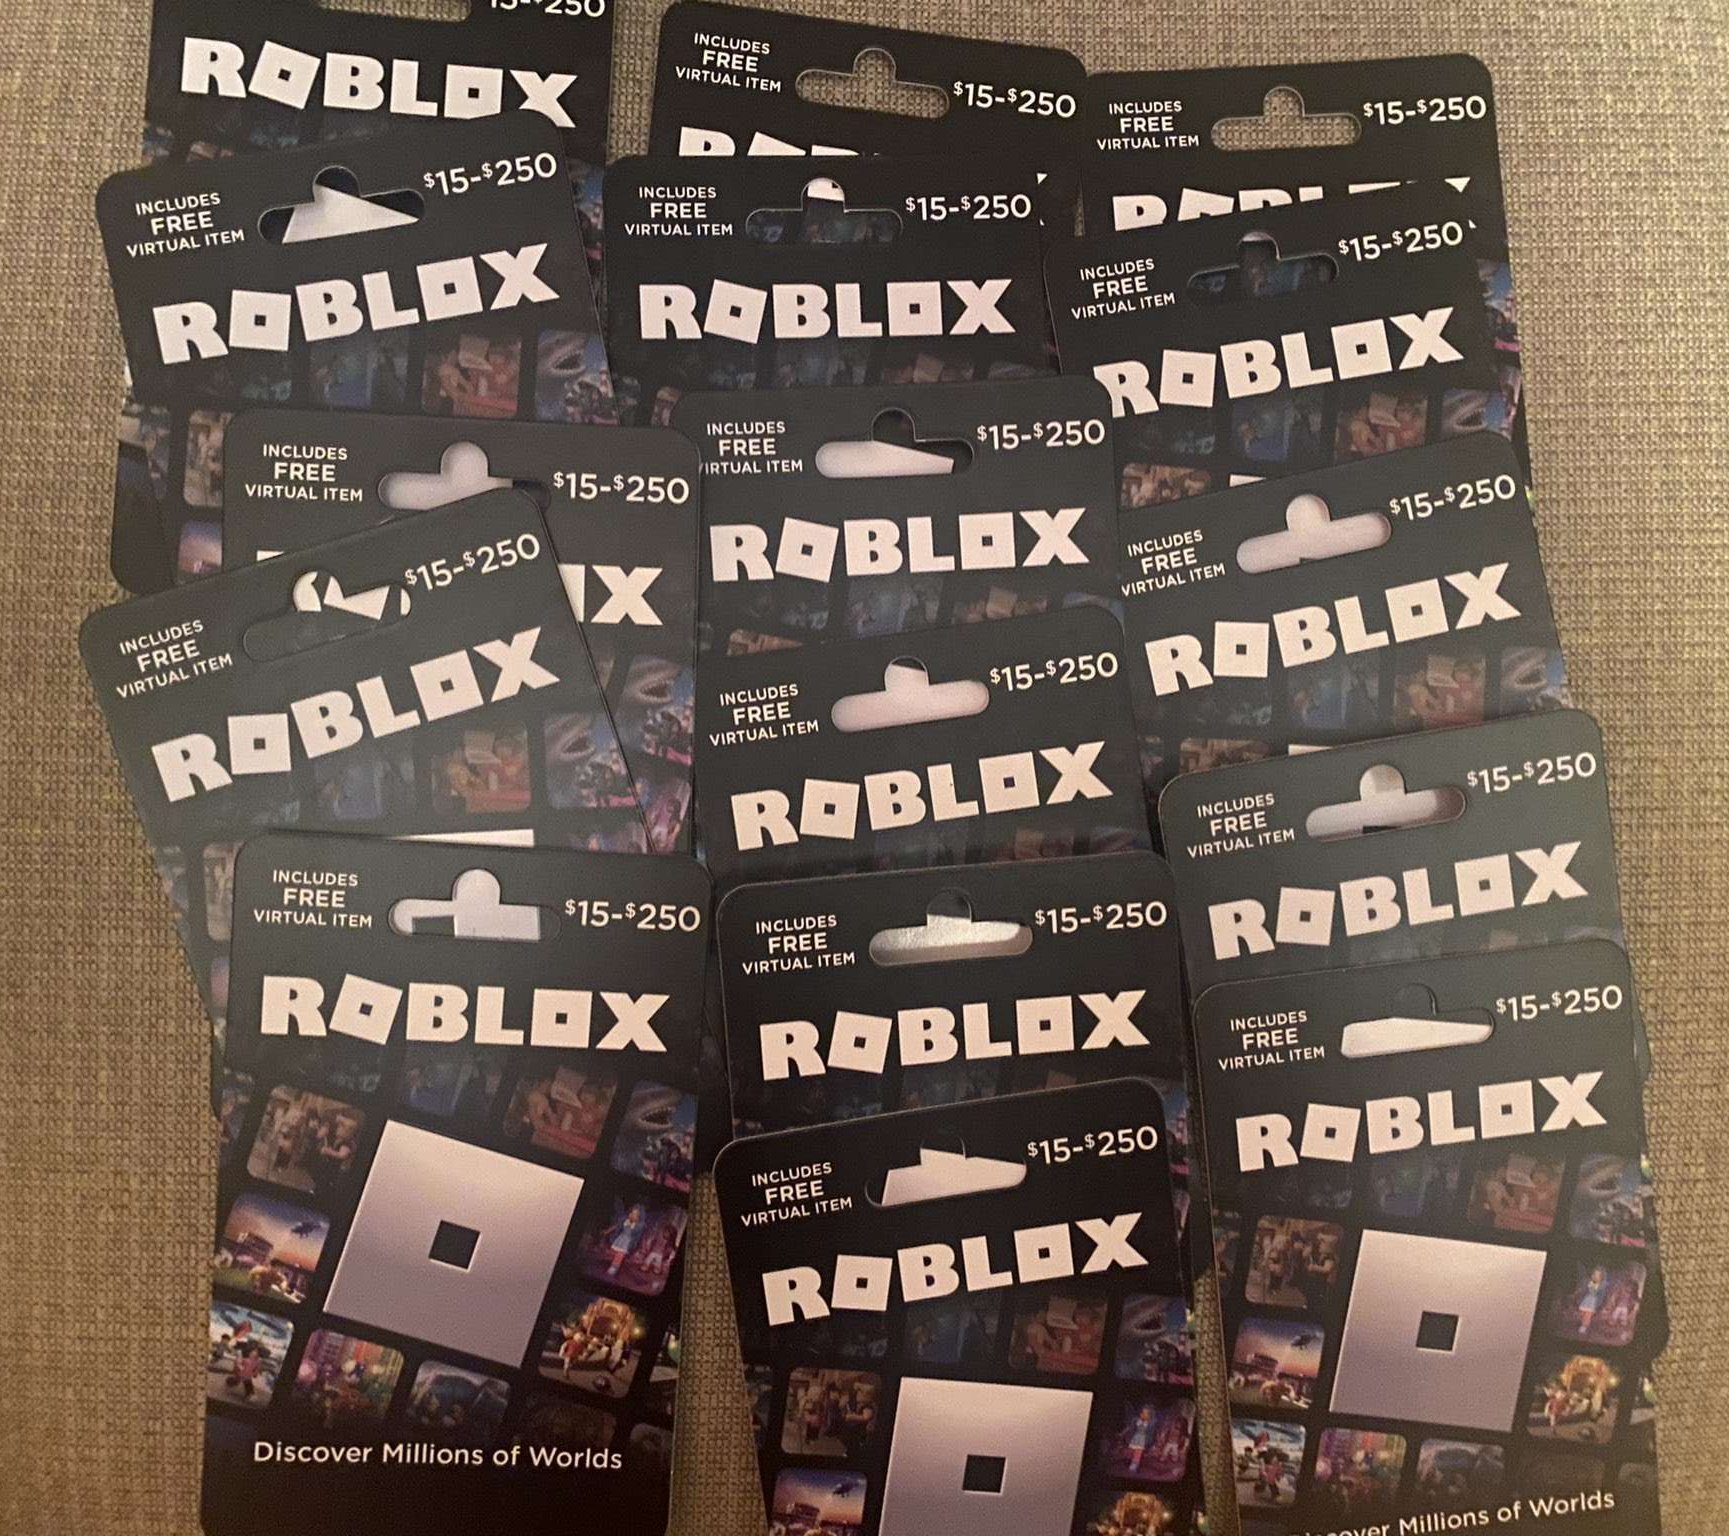 Check Bio to try to win Some Robux #roblox #robux #freerobux in